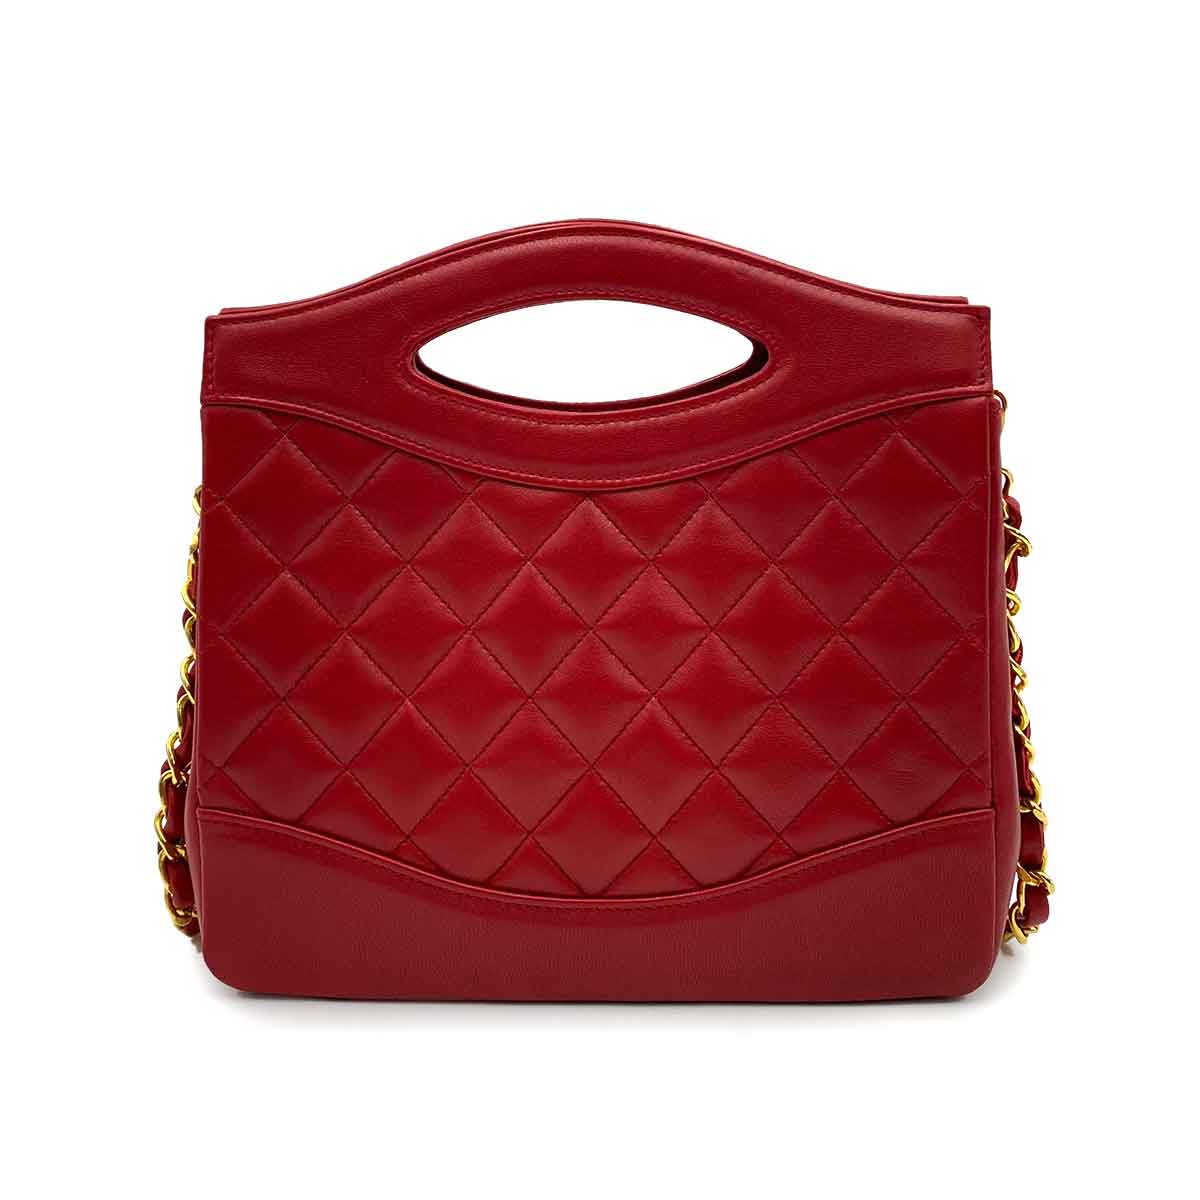 Chanel Chanel Vintage Top Handle Tote Red Lambskin GHW #1
 90232185